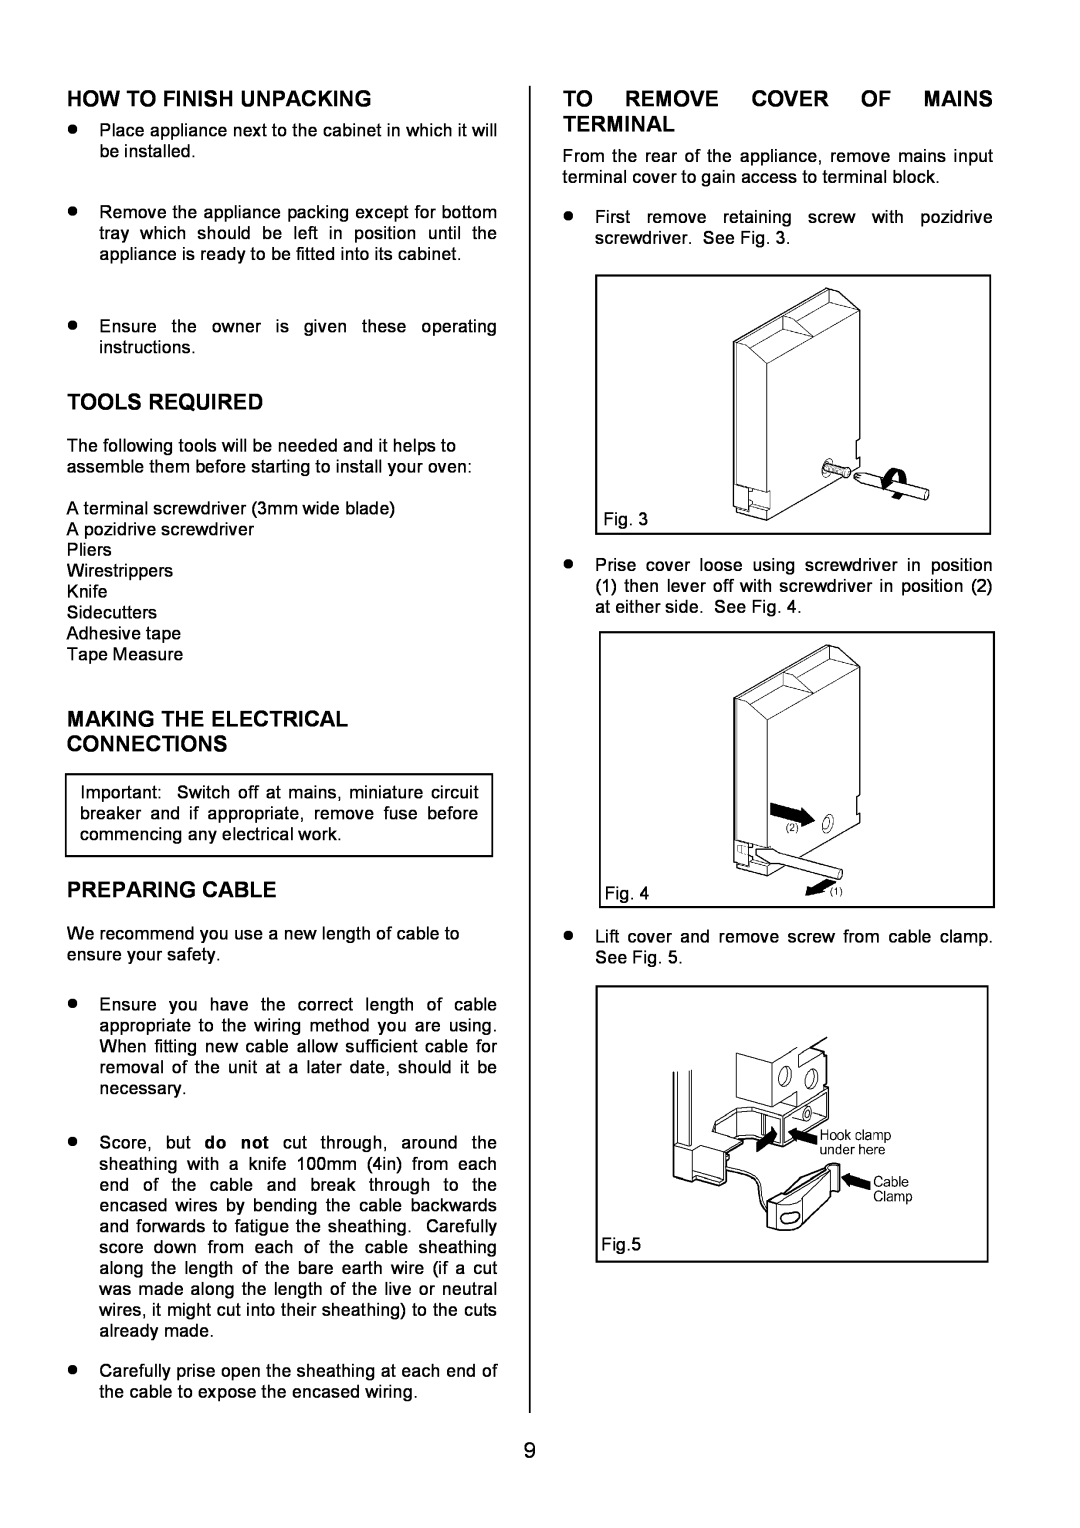 Zanussi ZDQ 695 manual How To Finish Unpacking, Tools Required, Making The Electrical Connections, Preparing Cable 